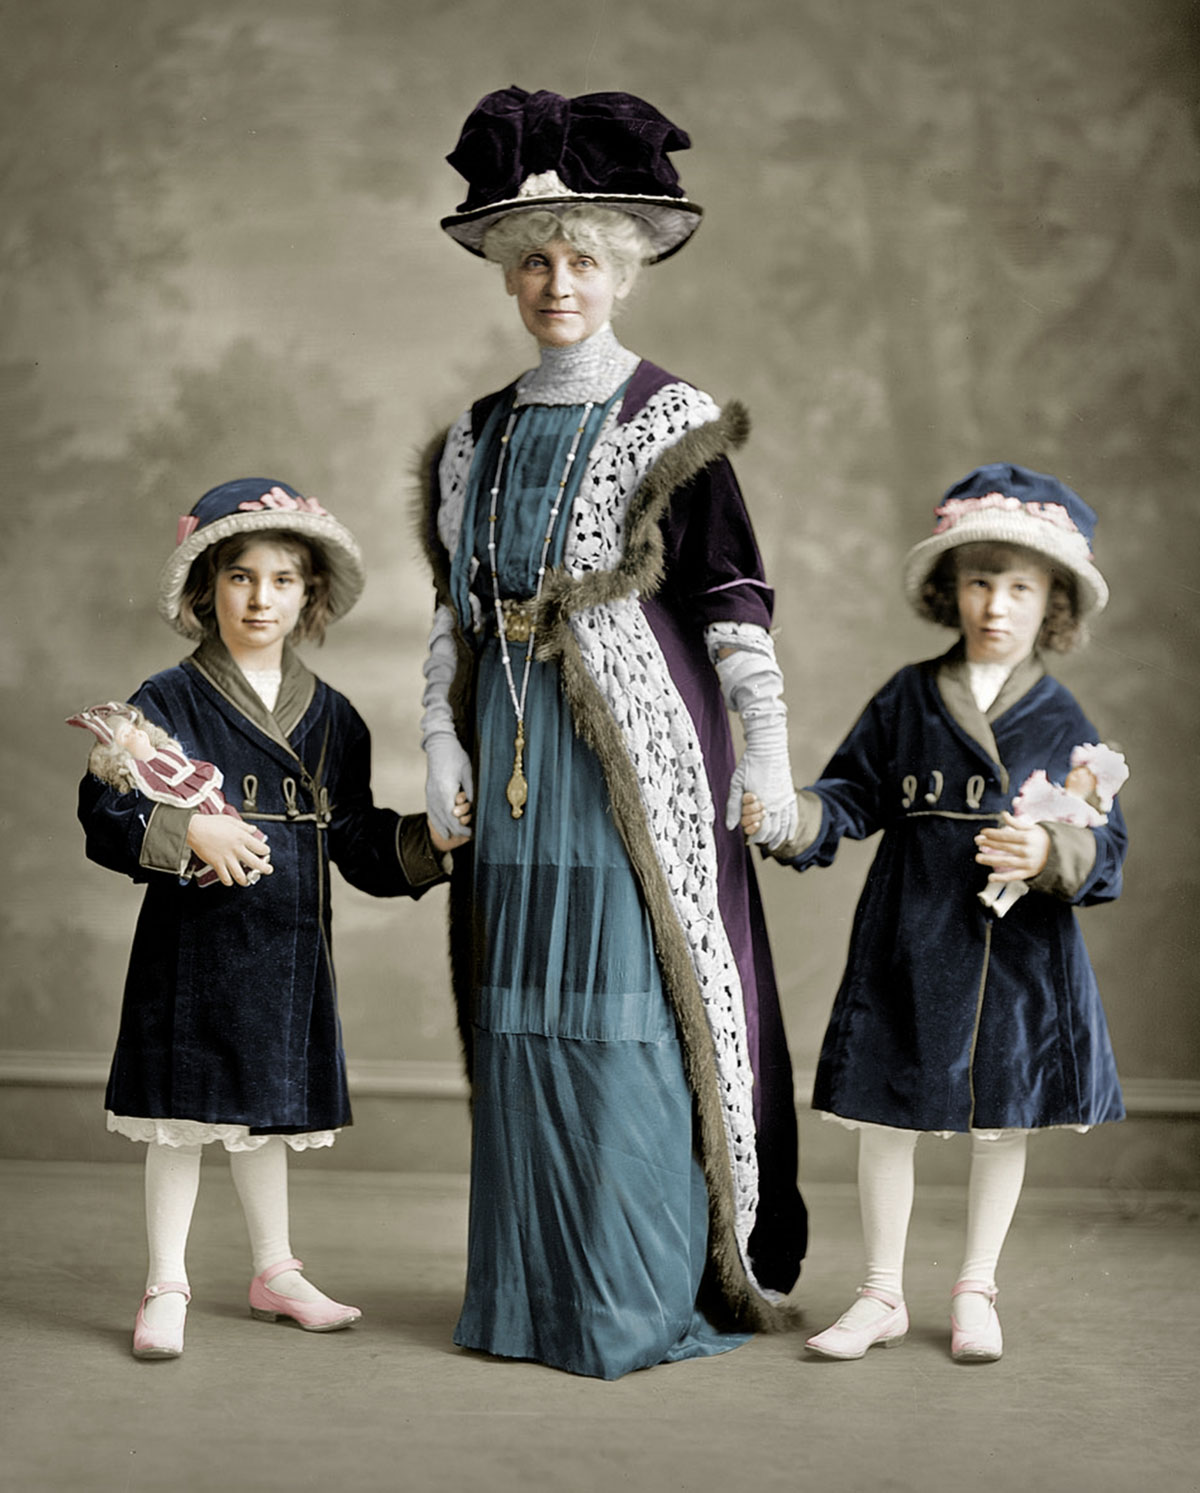 A colorized version of Just Us Girls, 1910. View full size.